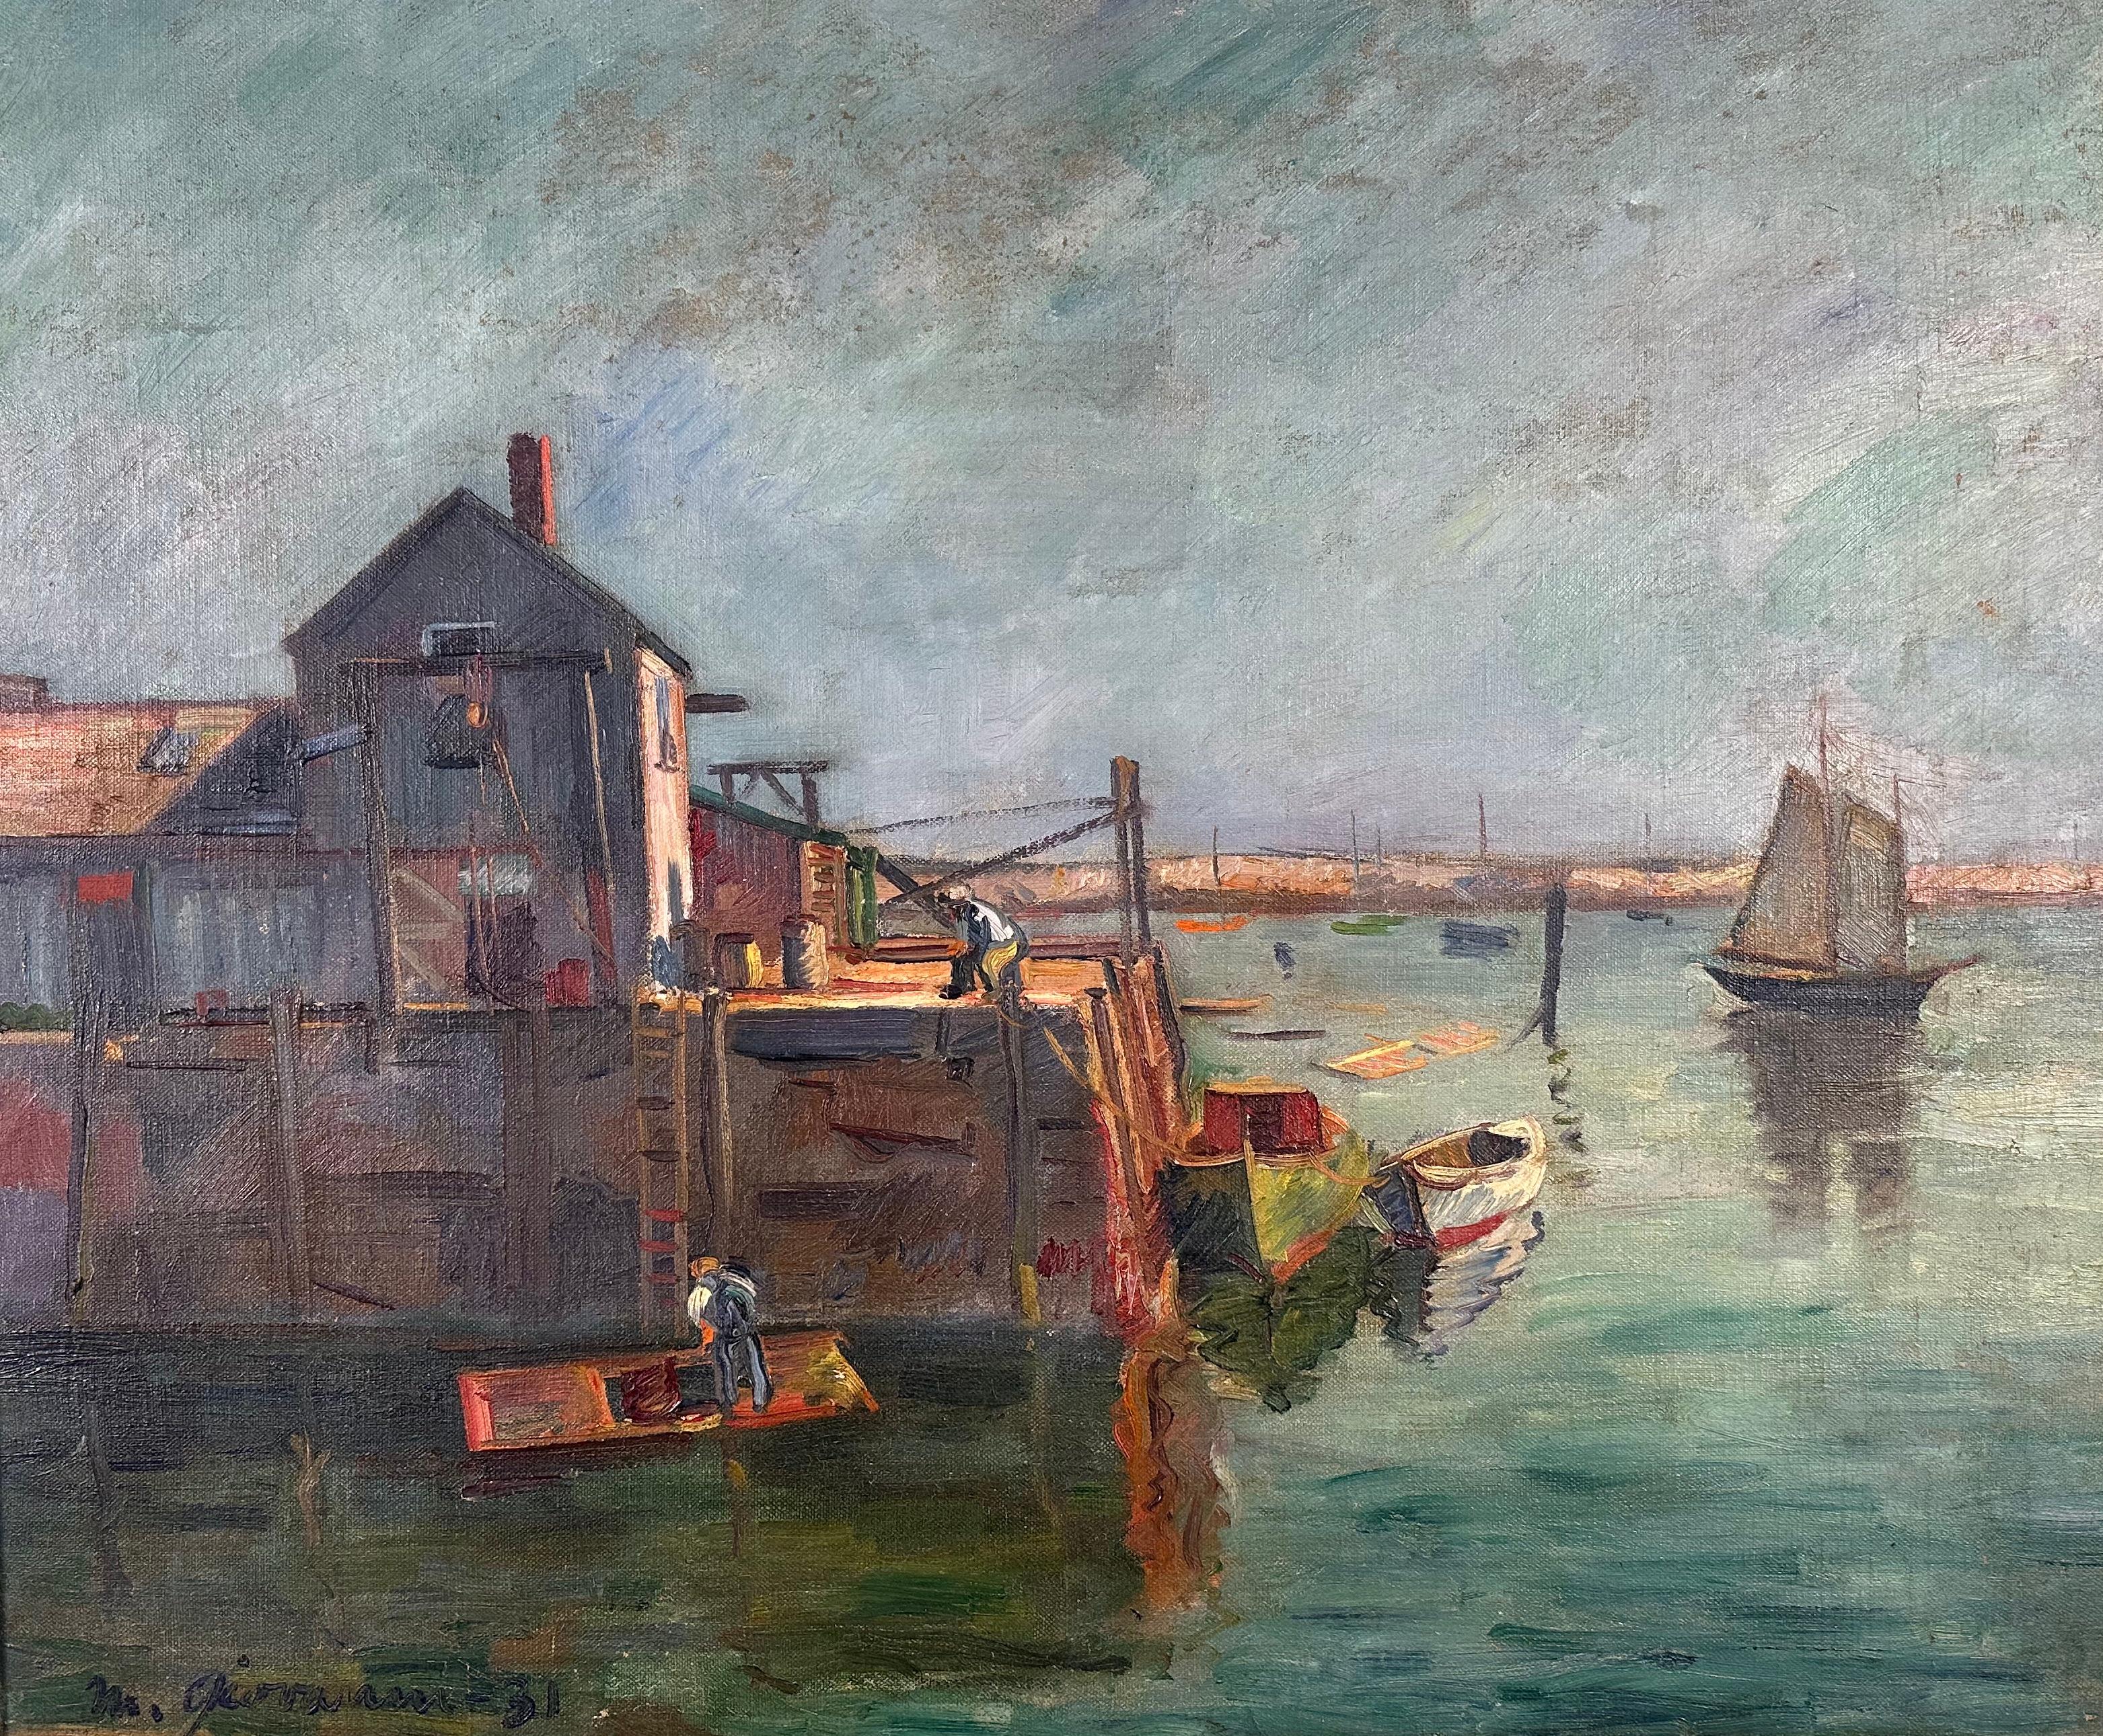 Rockport Landscape  - Painting by Giovanni Martino